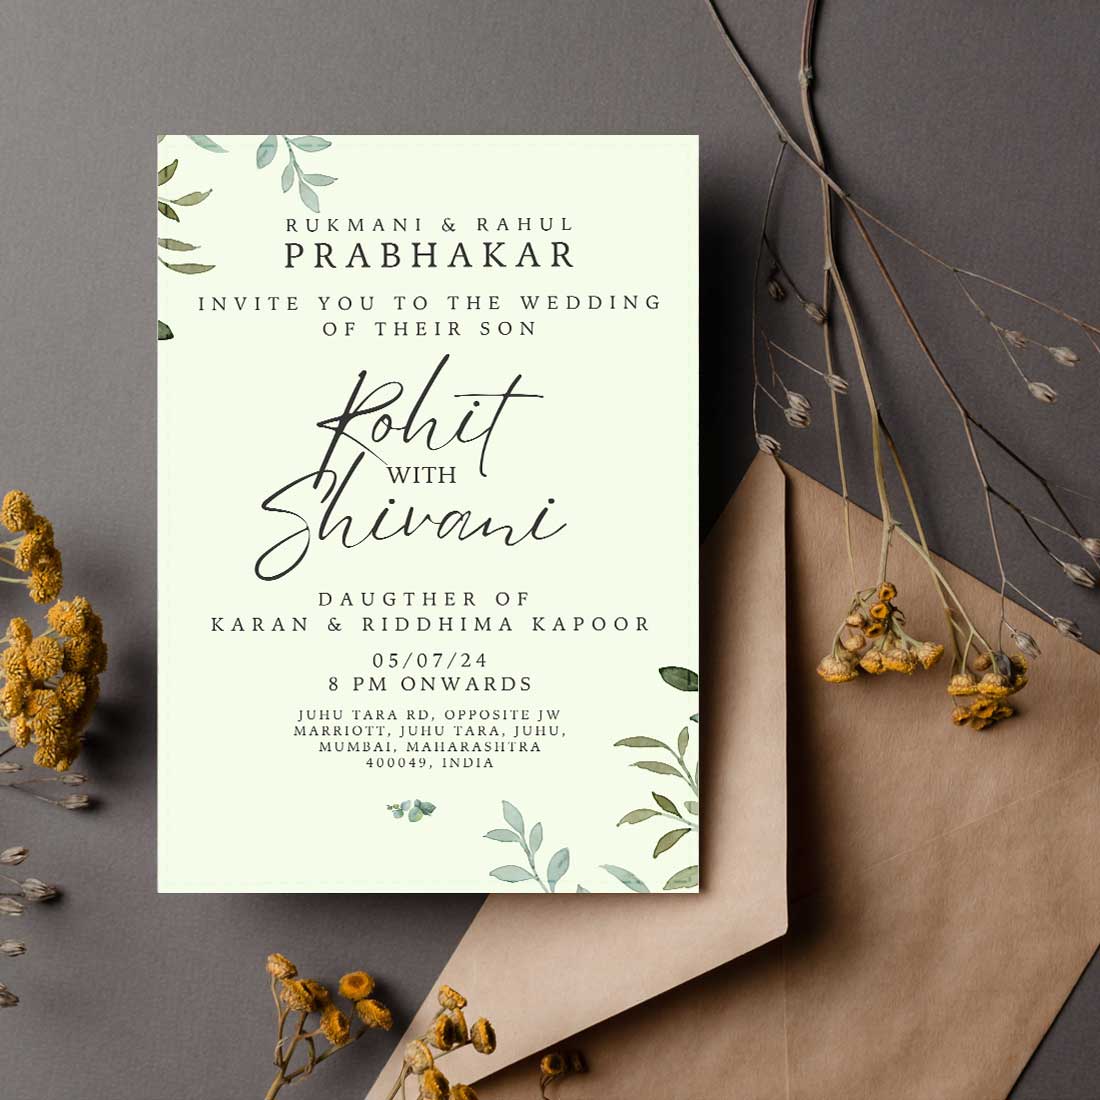 Create Marriage Invitation Card - Personalized Marriage Invite-6x9 inches (Acrylic or Satin on Paper Board)(25 pcs)